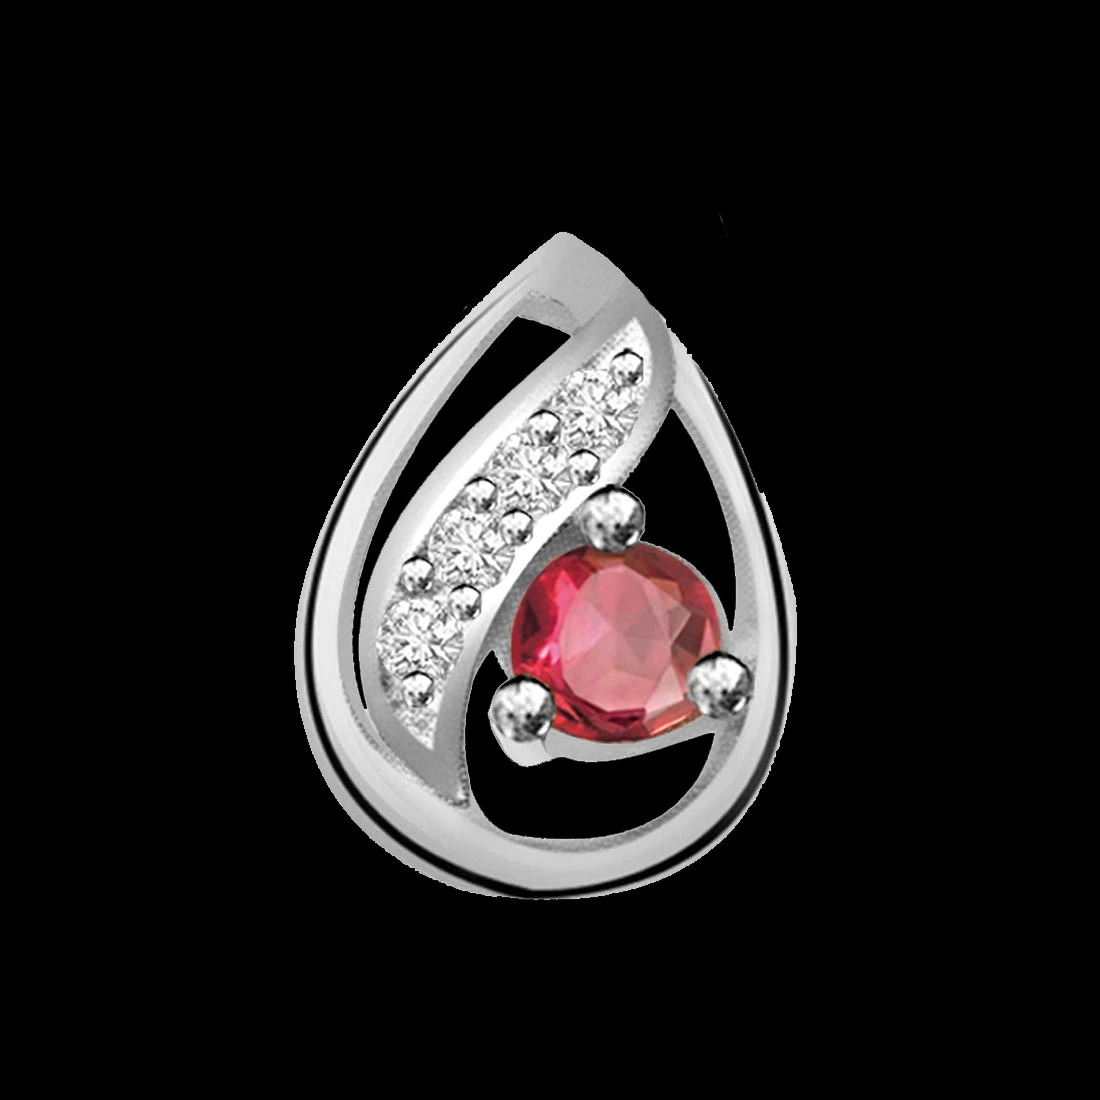 Bowl of Fun - Red Ruby, Real Diamond & Sterling Silver Pendant with 18 IN Chain (SDP175)